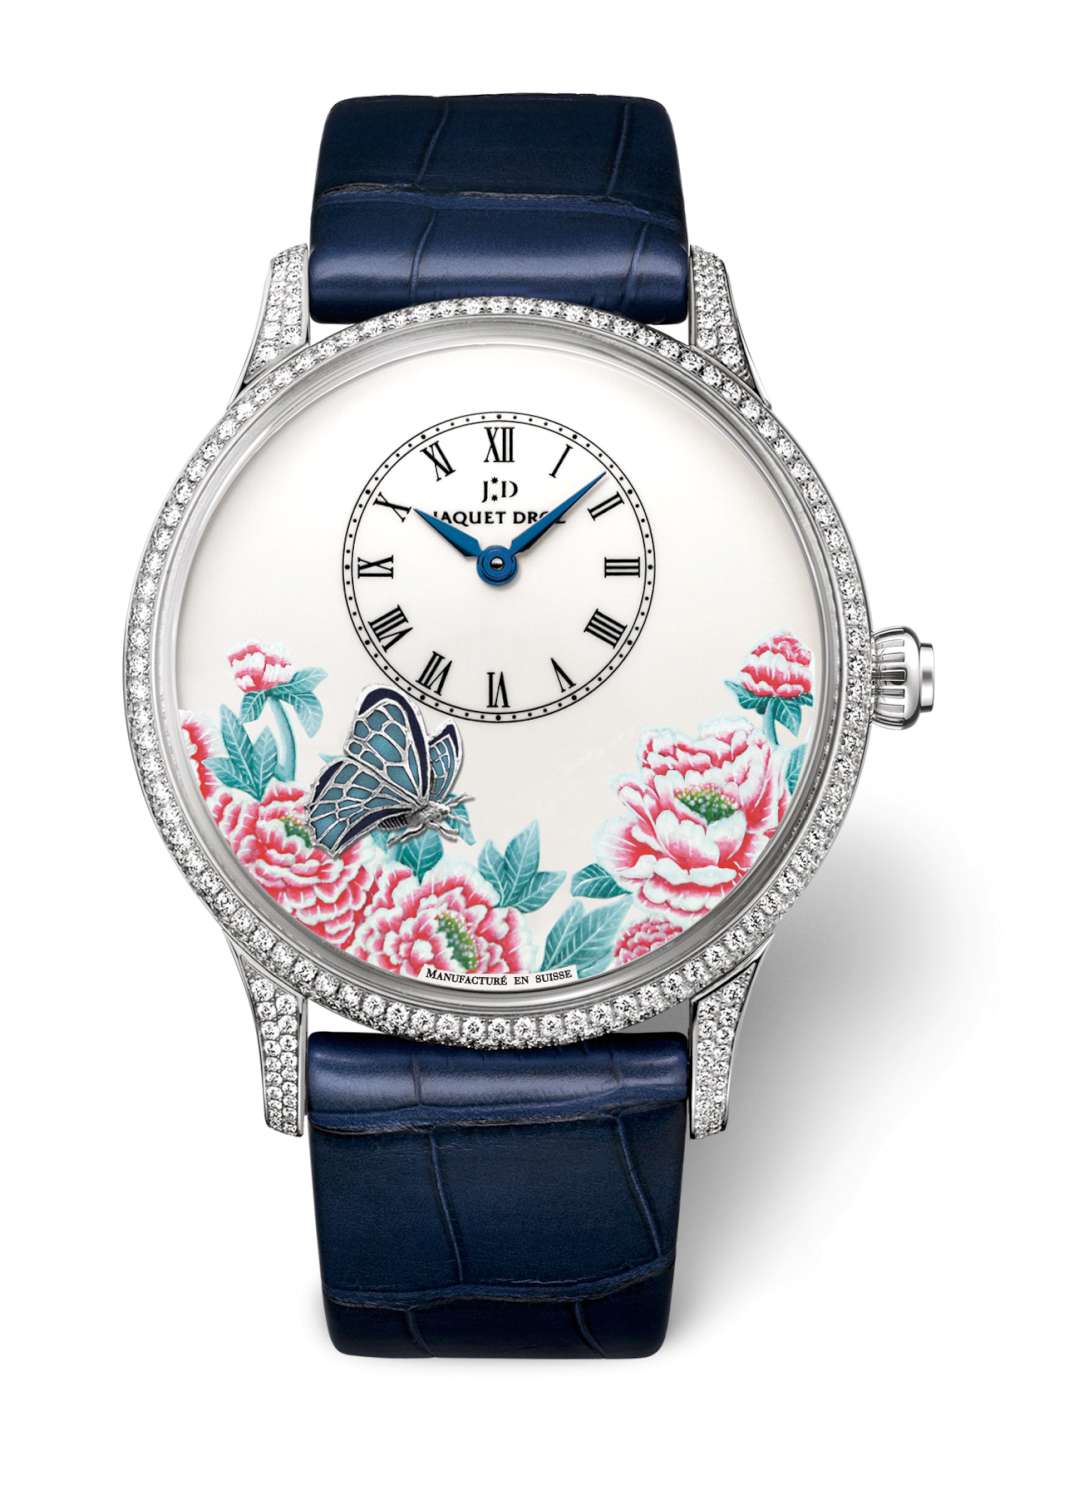 J005034265_PETITE_HEURE_MINUTE_THE_BUTTERFLY_JOURNEY-1500